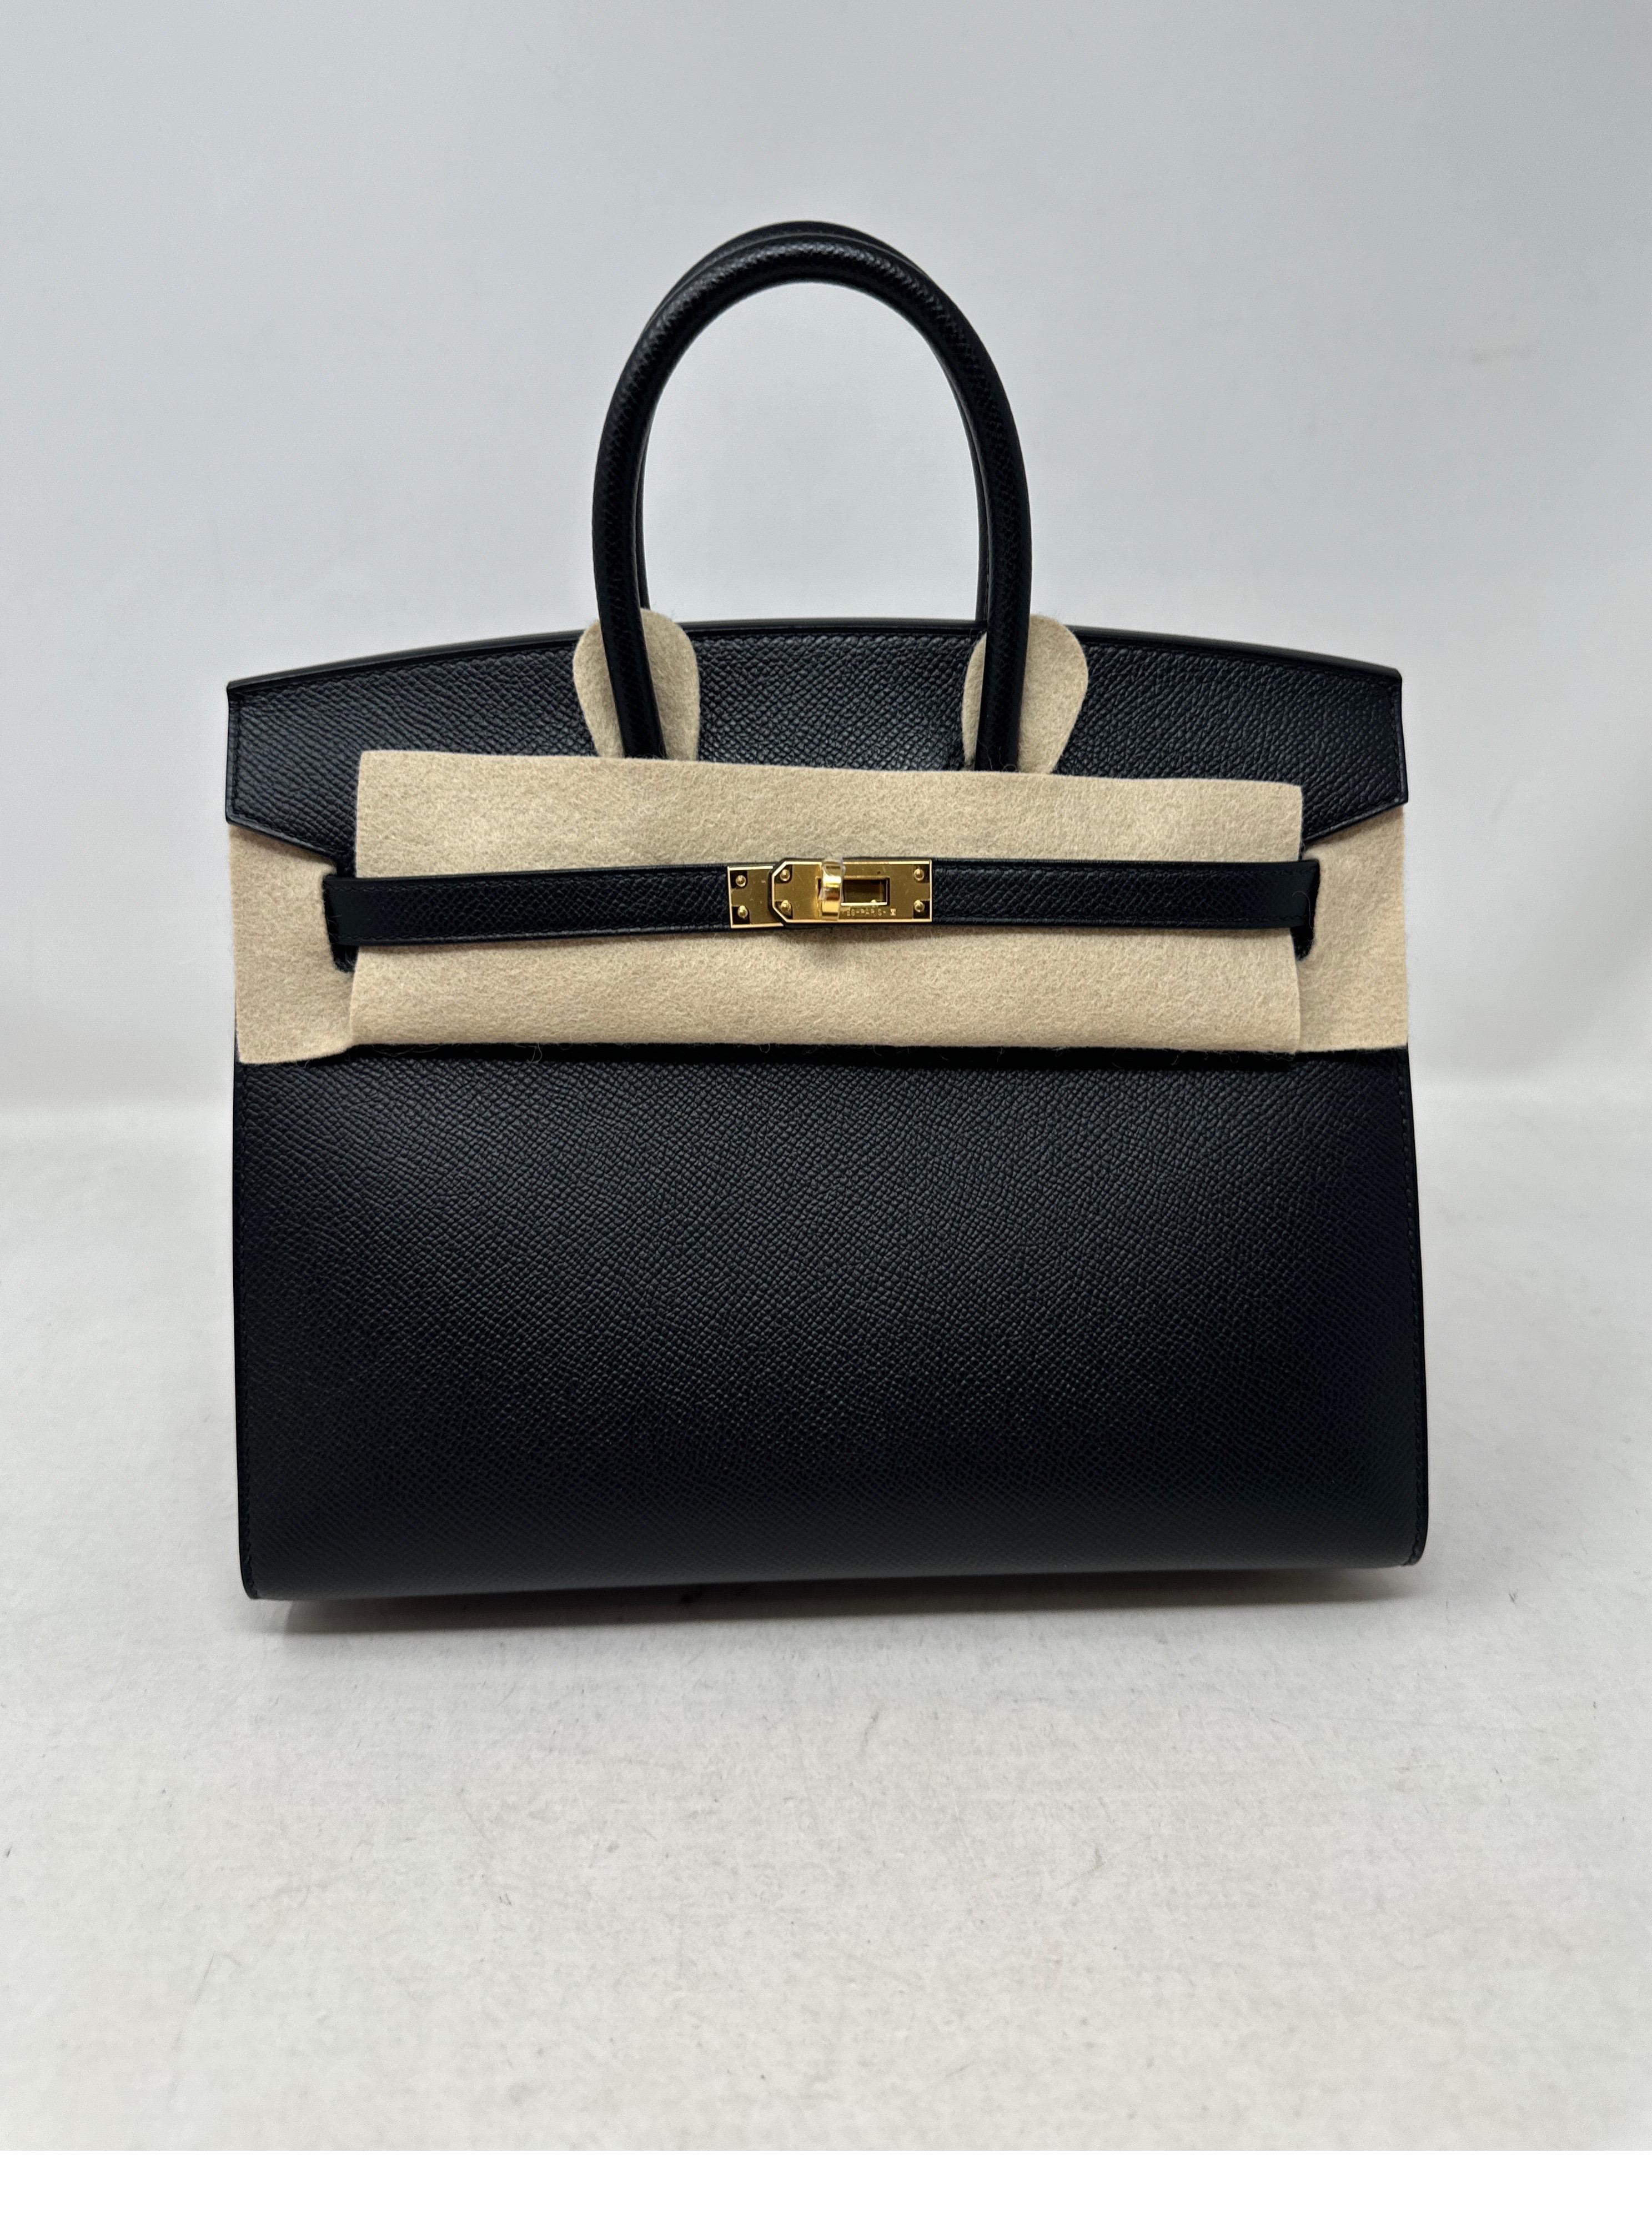 Hermes Black Birkin 25 Bag. Epsom sellier Birkin. Brand new from 2022. Rarest size and combo. Full set. Includes original receipt. Never used. Gold hardware. Includes receipt, dust bag, and box. Guaranteed authentic. 